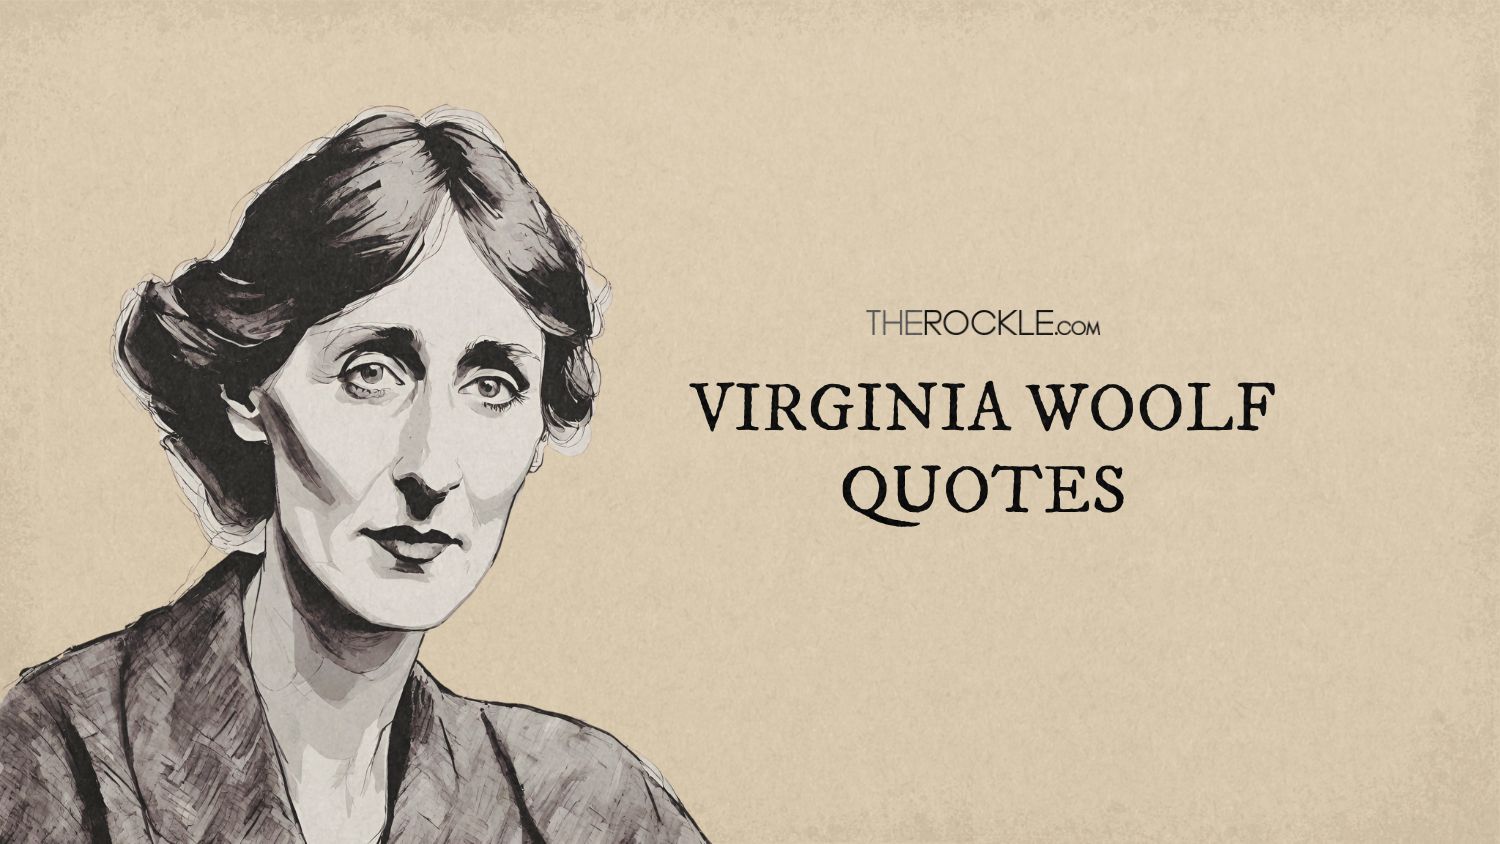 10 Virginia Woolf Quotes Every Book Lover Should Know